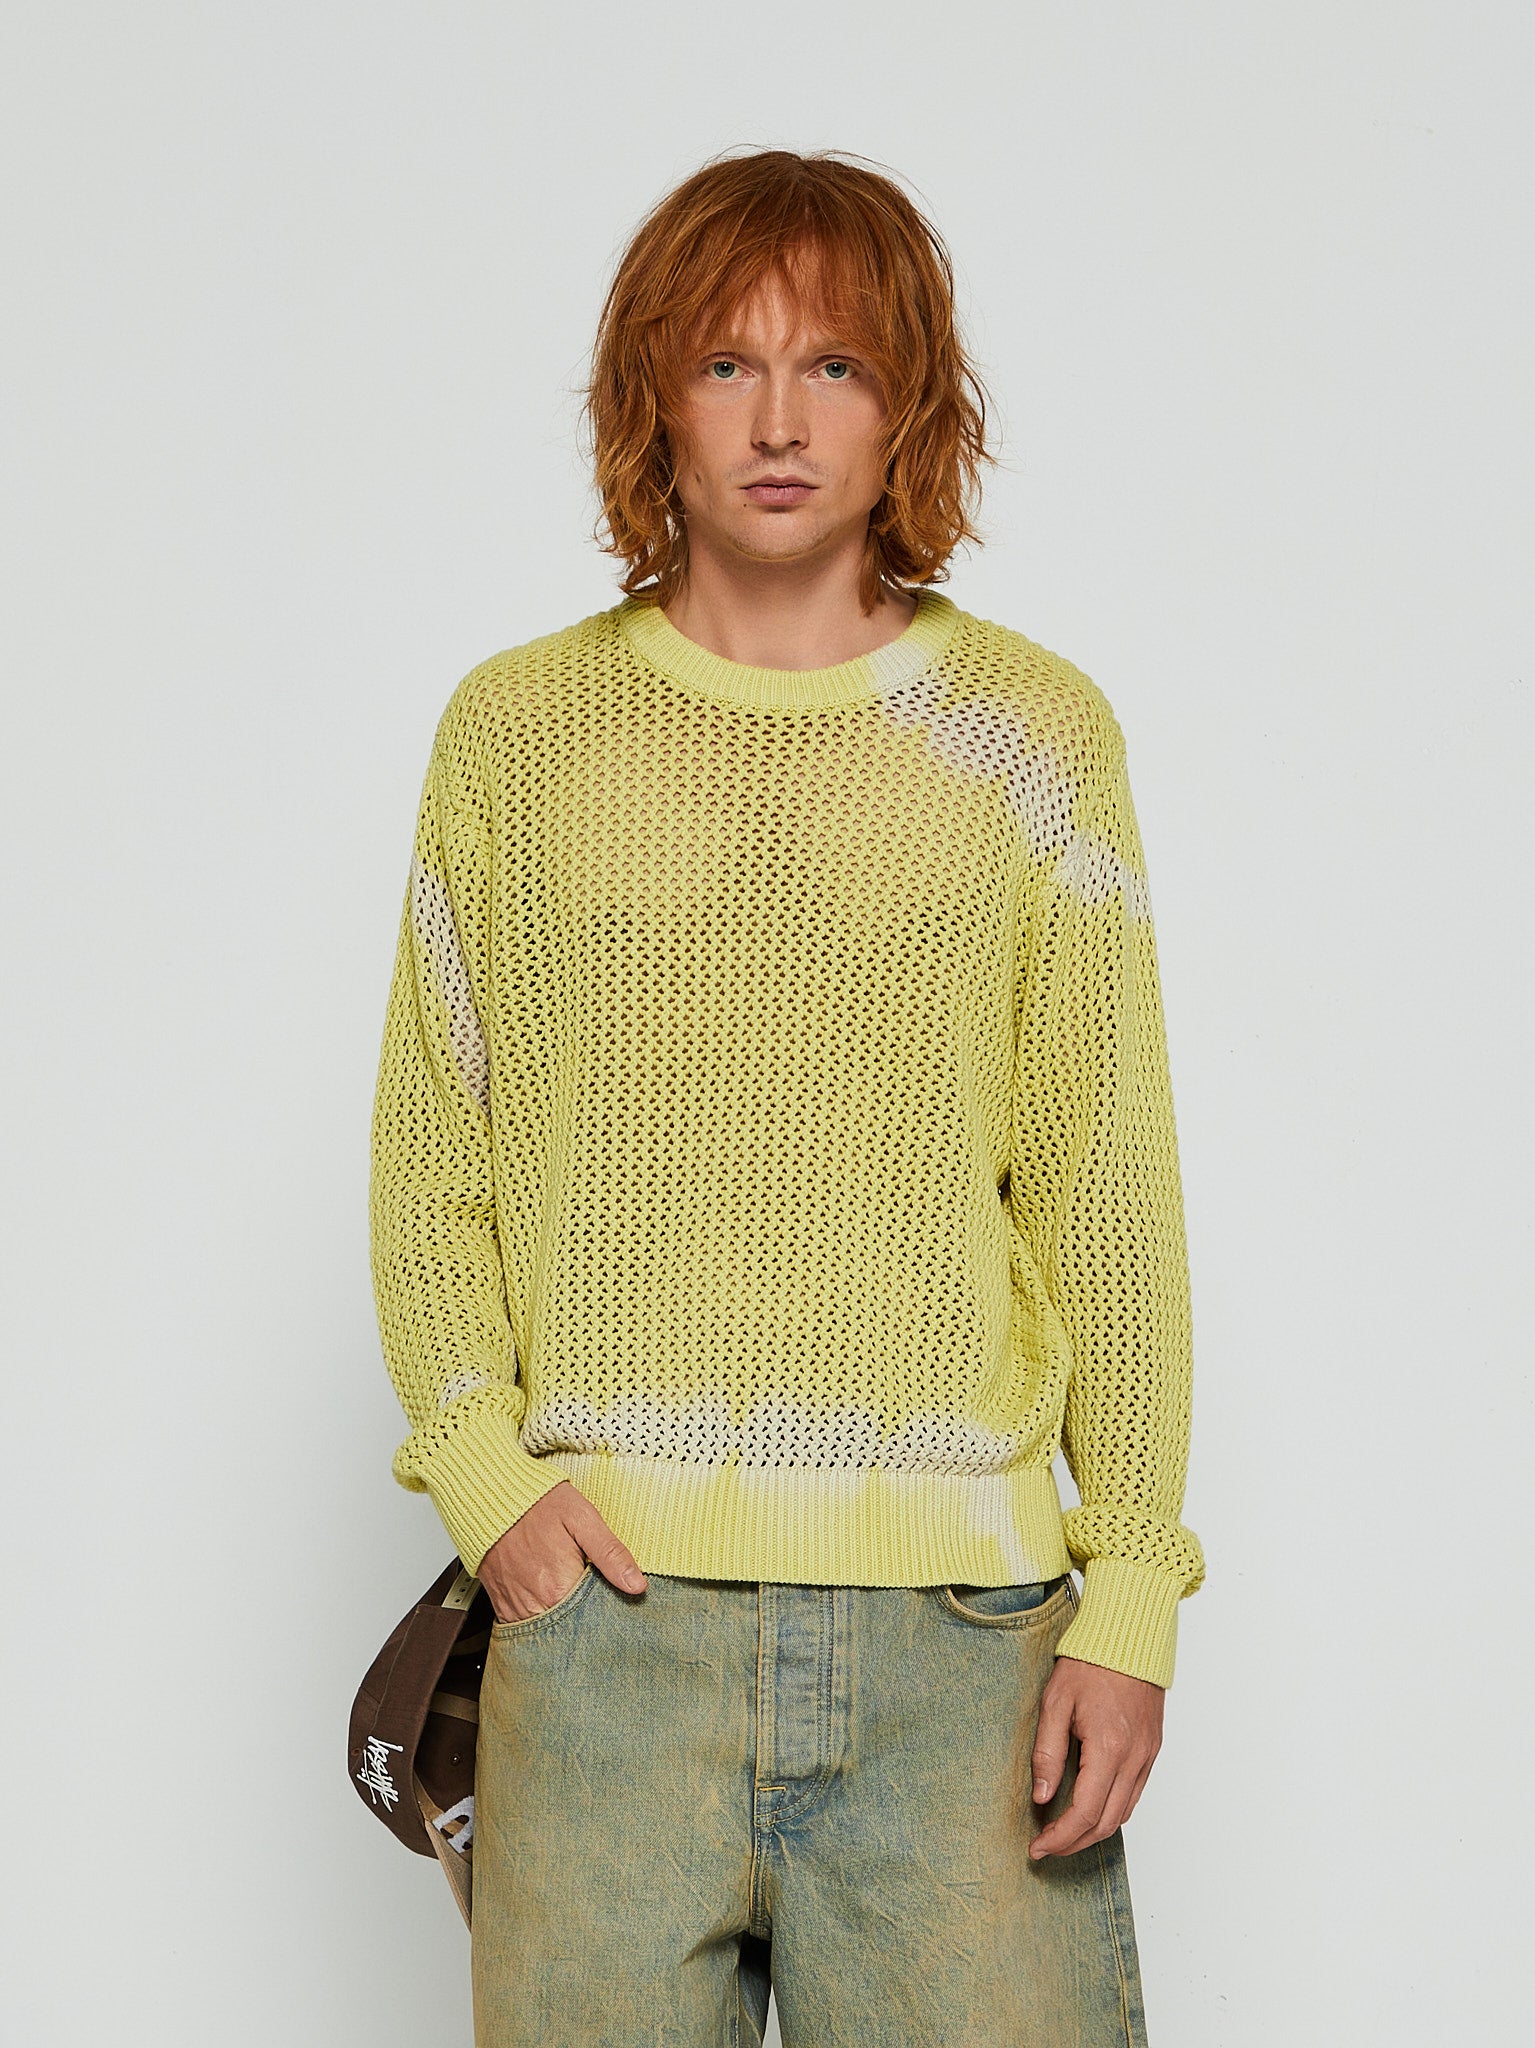 Pigment Dyed Loose Gauge Sweater in Tie Dye Yellow